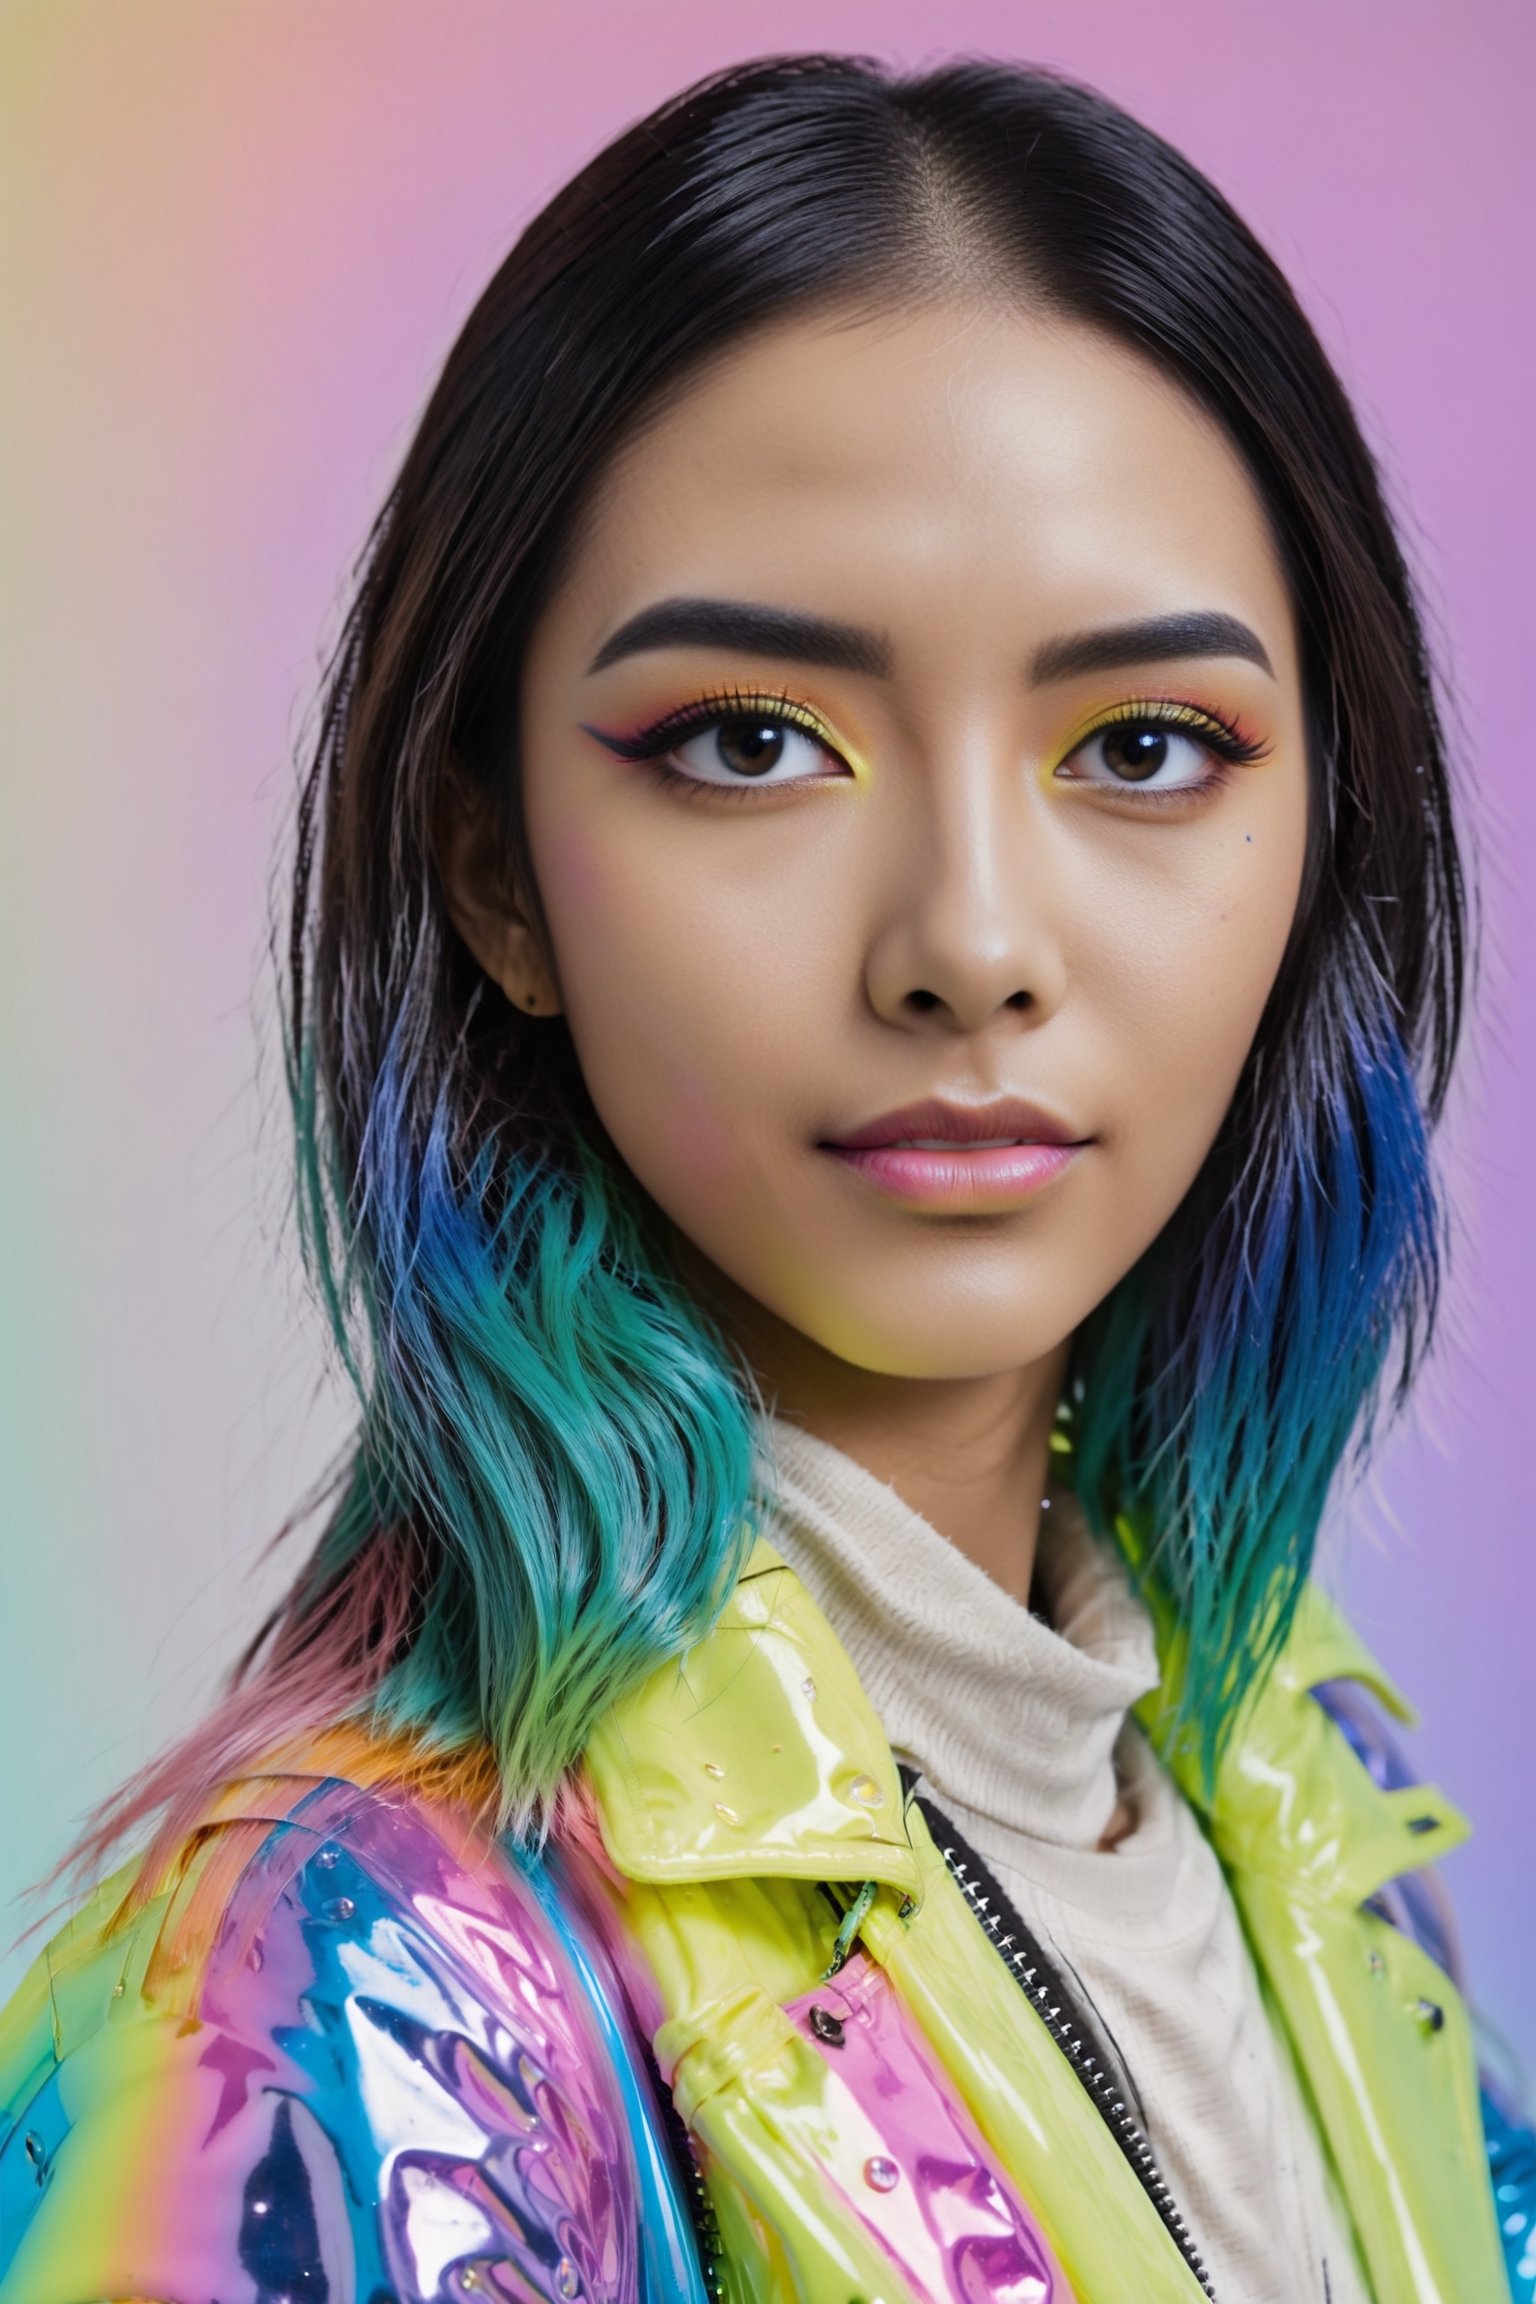 A closeup of an Asian model with sleek, straight hair in rainbow pastel colors, wearing futuristic makeup and in the style of the designer Balenciaga. The background is a soft gray gradient that creates depth and focus on her face. She has large eyes with smoky eyeshadow, and she's wearing pink lipstick. Her outfit includes iridescent plastic shoulders covered in shiny droplets of water, giving it a wet look.,renny the insta girl,Versace girl model